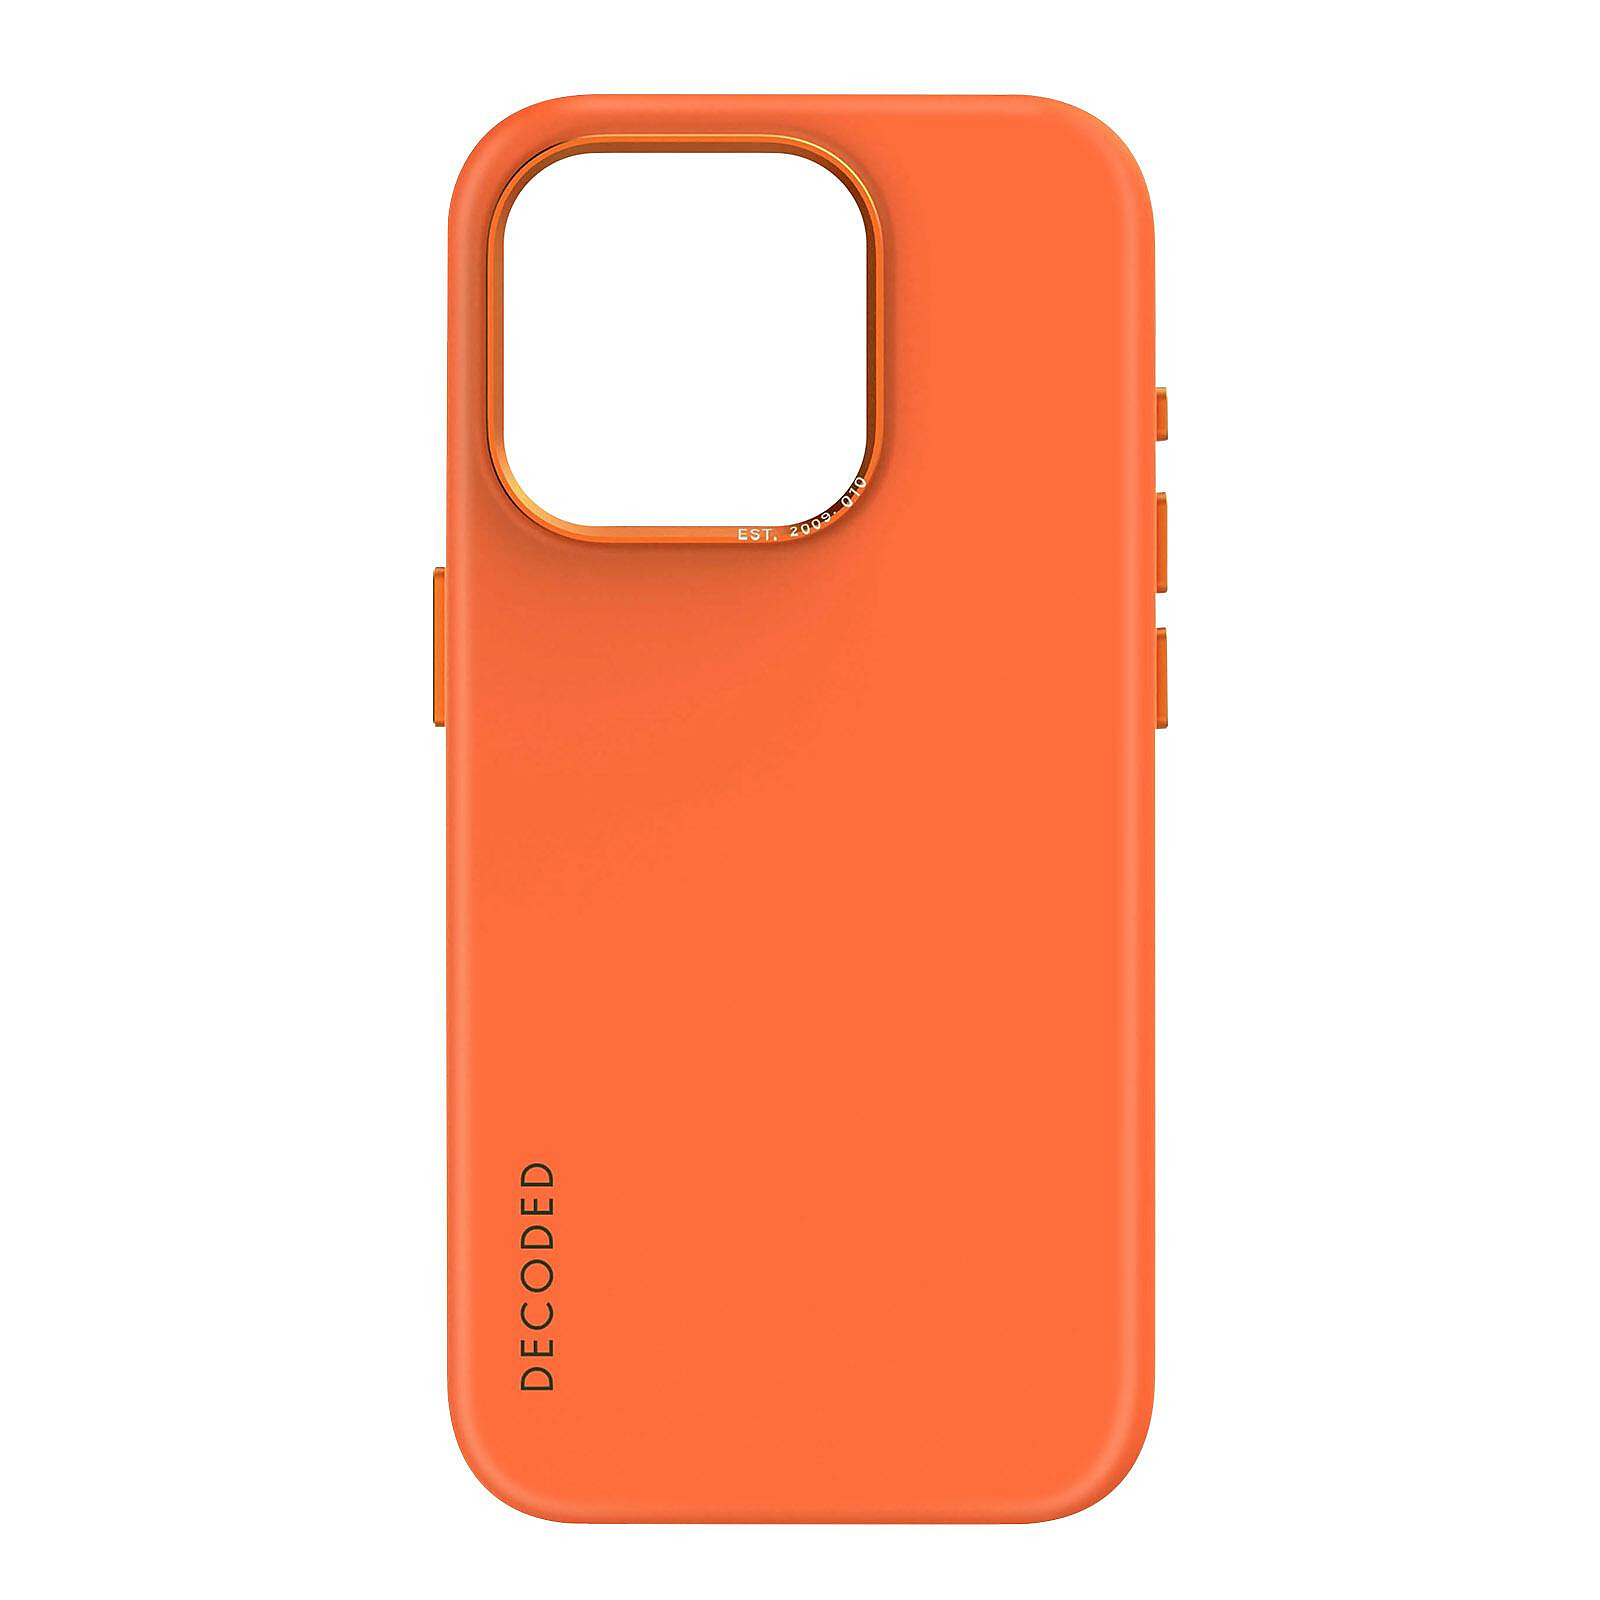 Coque silicone iPhone 11 Semi rigide avec finition Cool Touch Rouge -  Accessoires